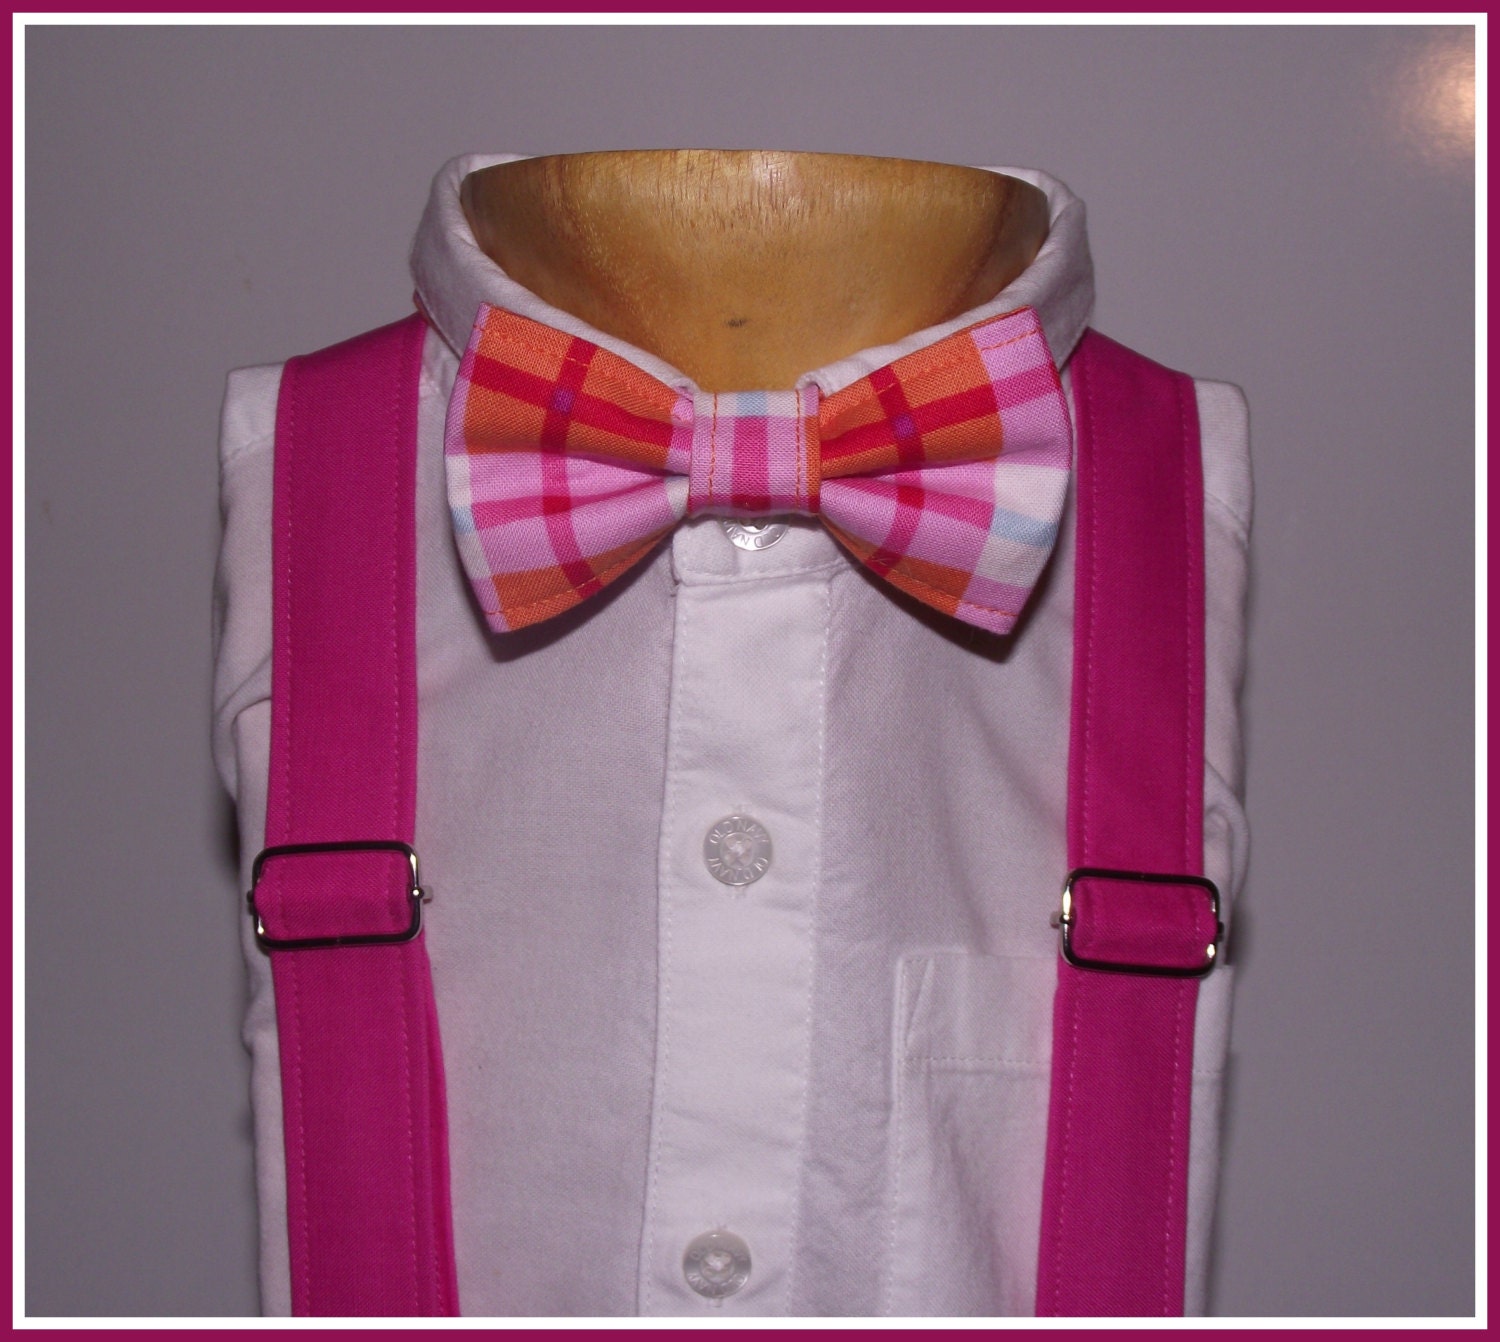 Boys Bow Tie and Suspenders: Plaid Bow Tie, Pink Suspenders, Hot Pink, Orange, Toddler Suspenders, Ring Bearer